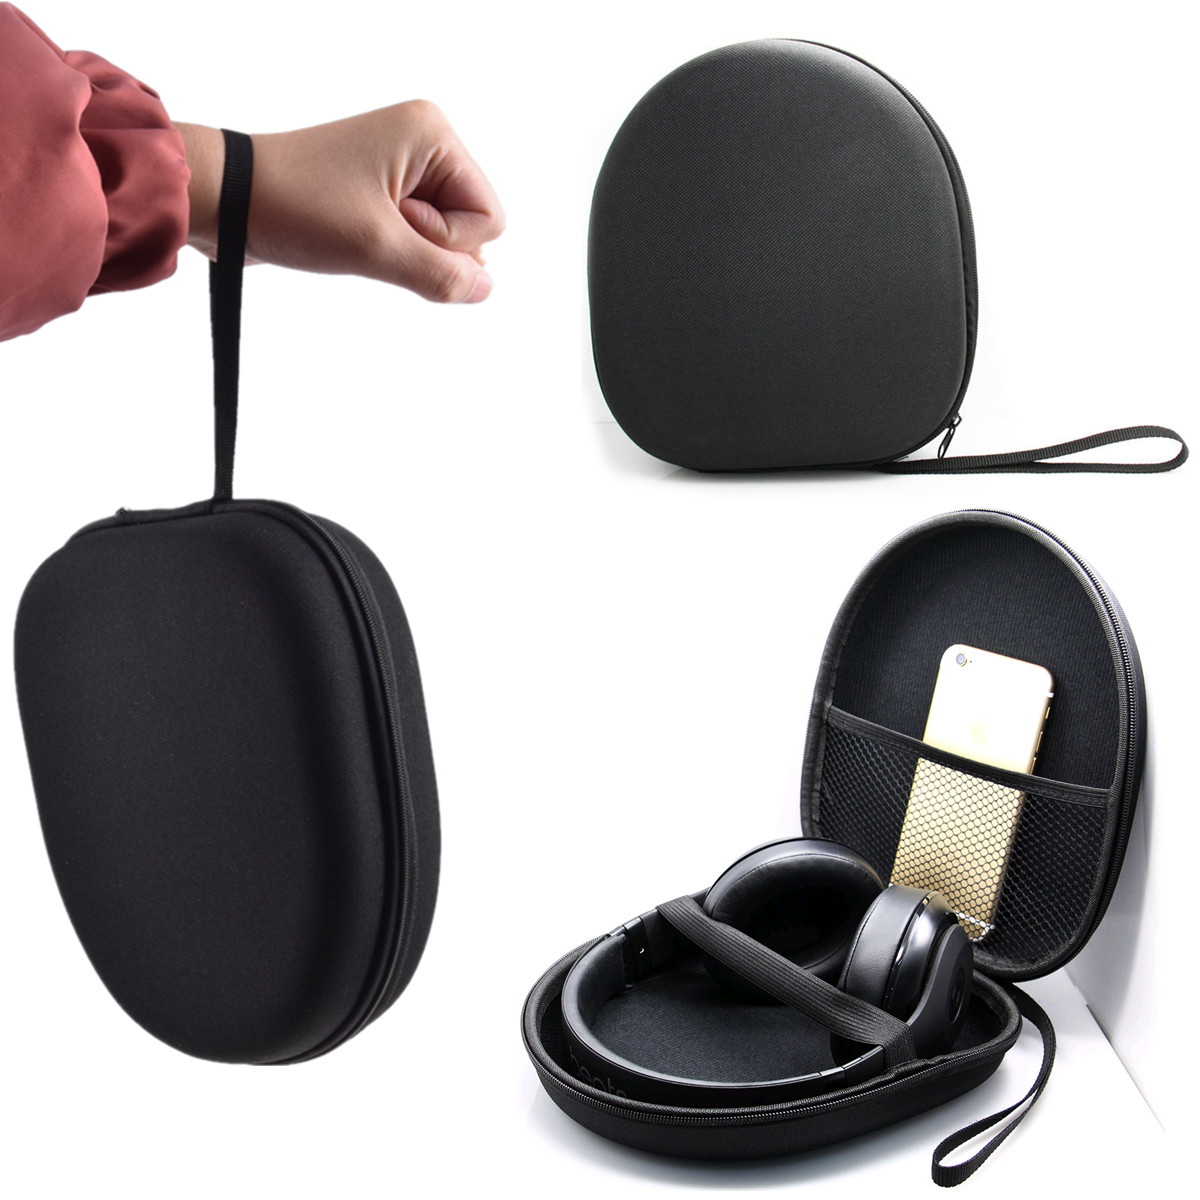 Bakeey-Universal-Portable-Carrying-Earphone-Shockproof-Protective-Case-Storage-Bag-Pouch-for-Sony-QC-1643522-6